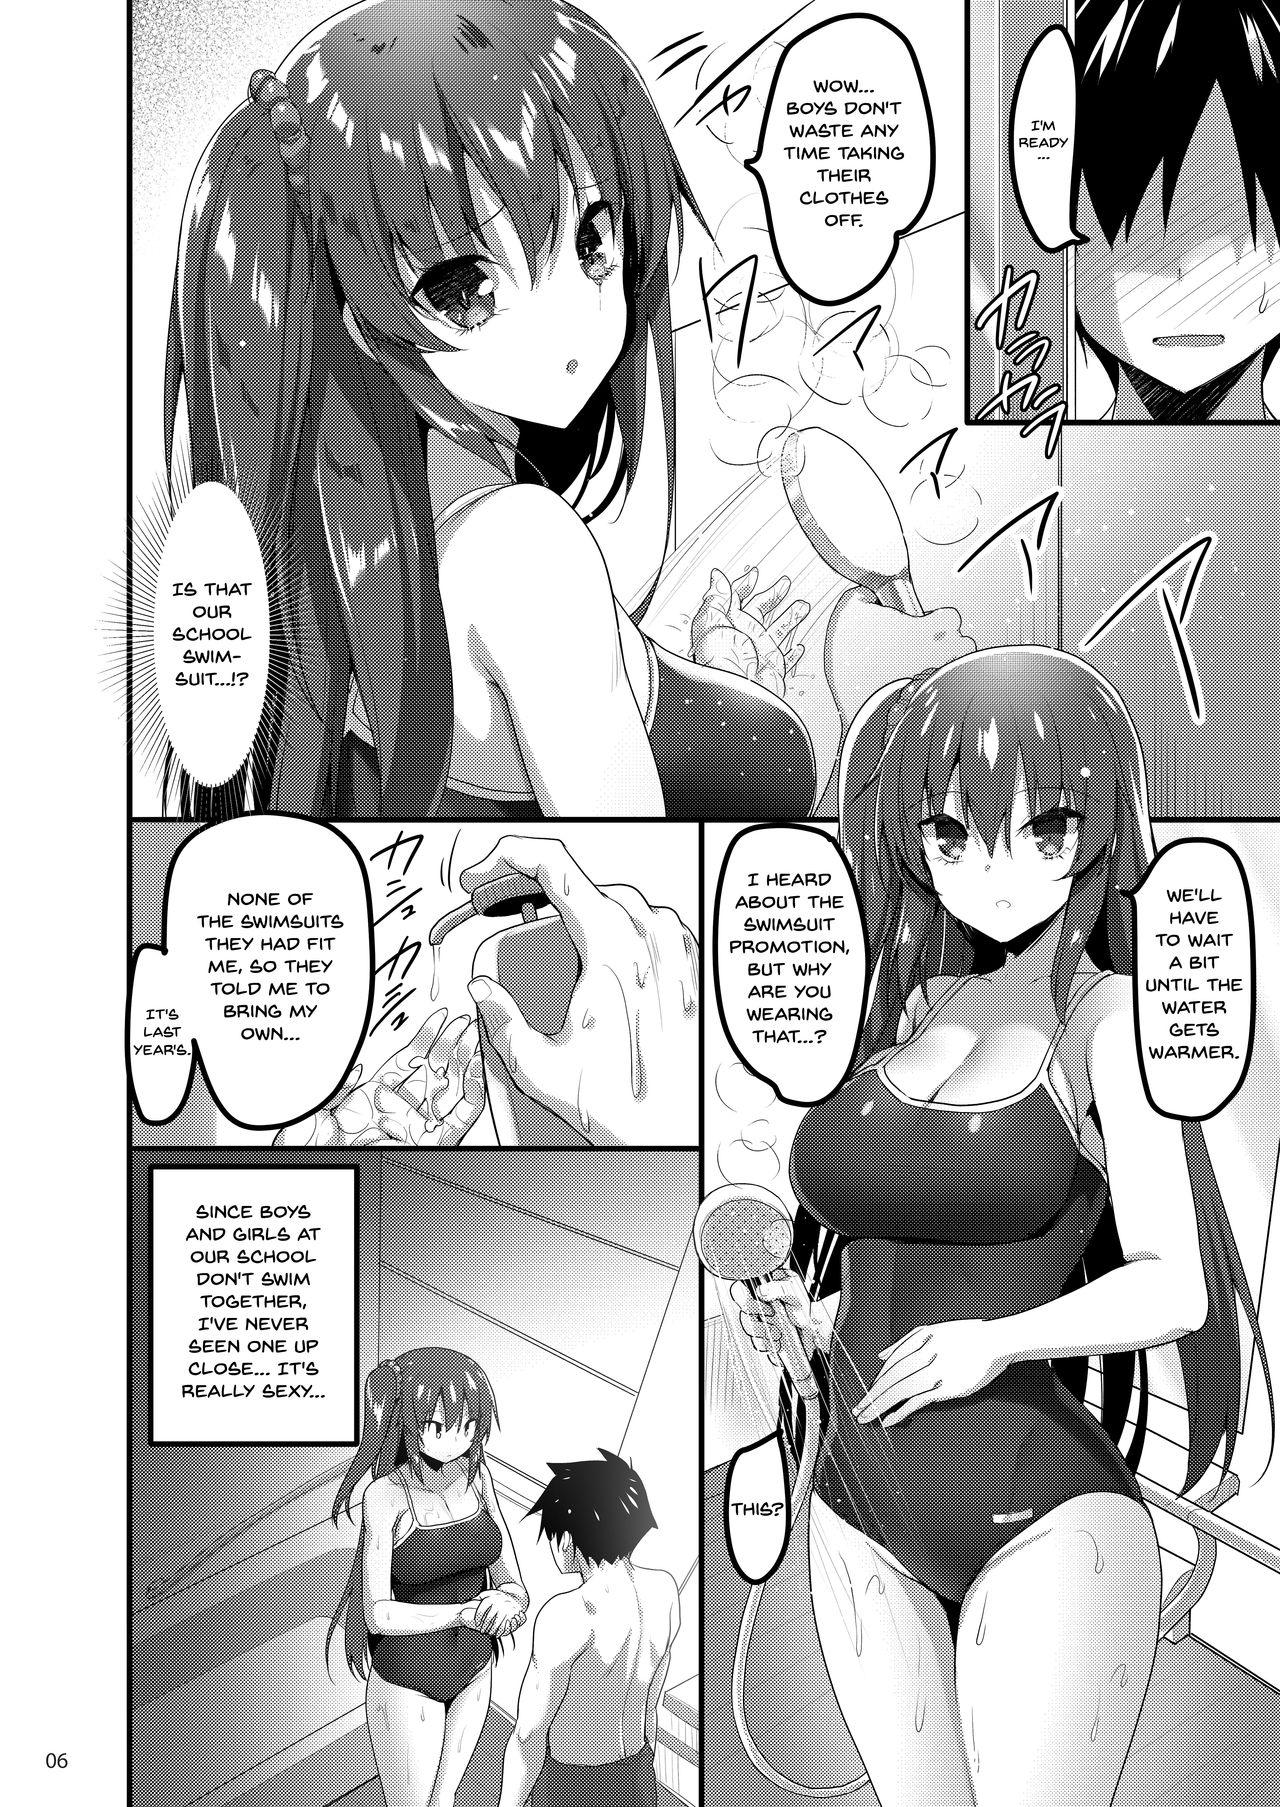 Teen Sex Ecchi na Massage-ya ni Kitara Classmate ga Dete Kita Hanashi | A Story Of Going Out To Get a Massage And The One Who Shows Up Is My Classmate - Original Bj - Page 5